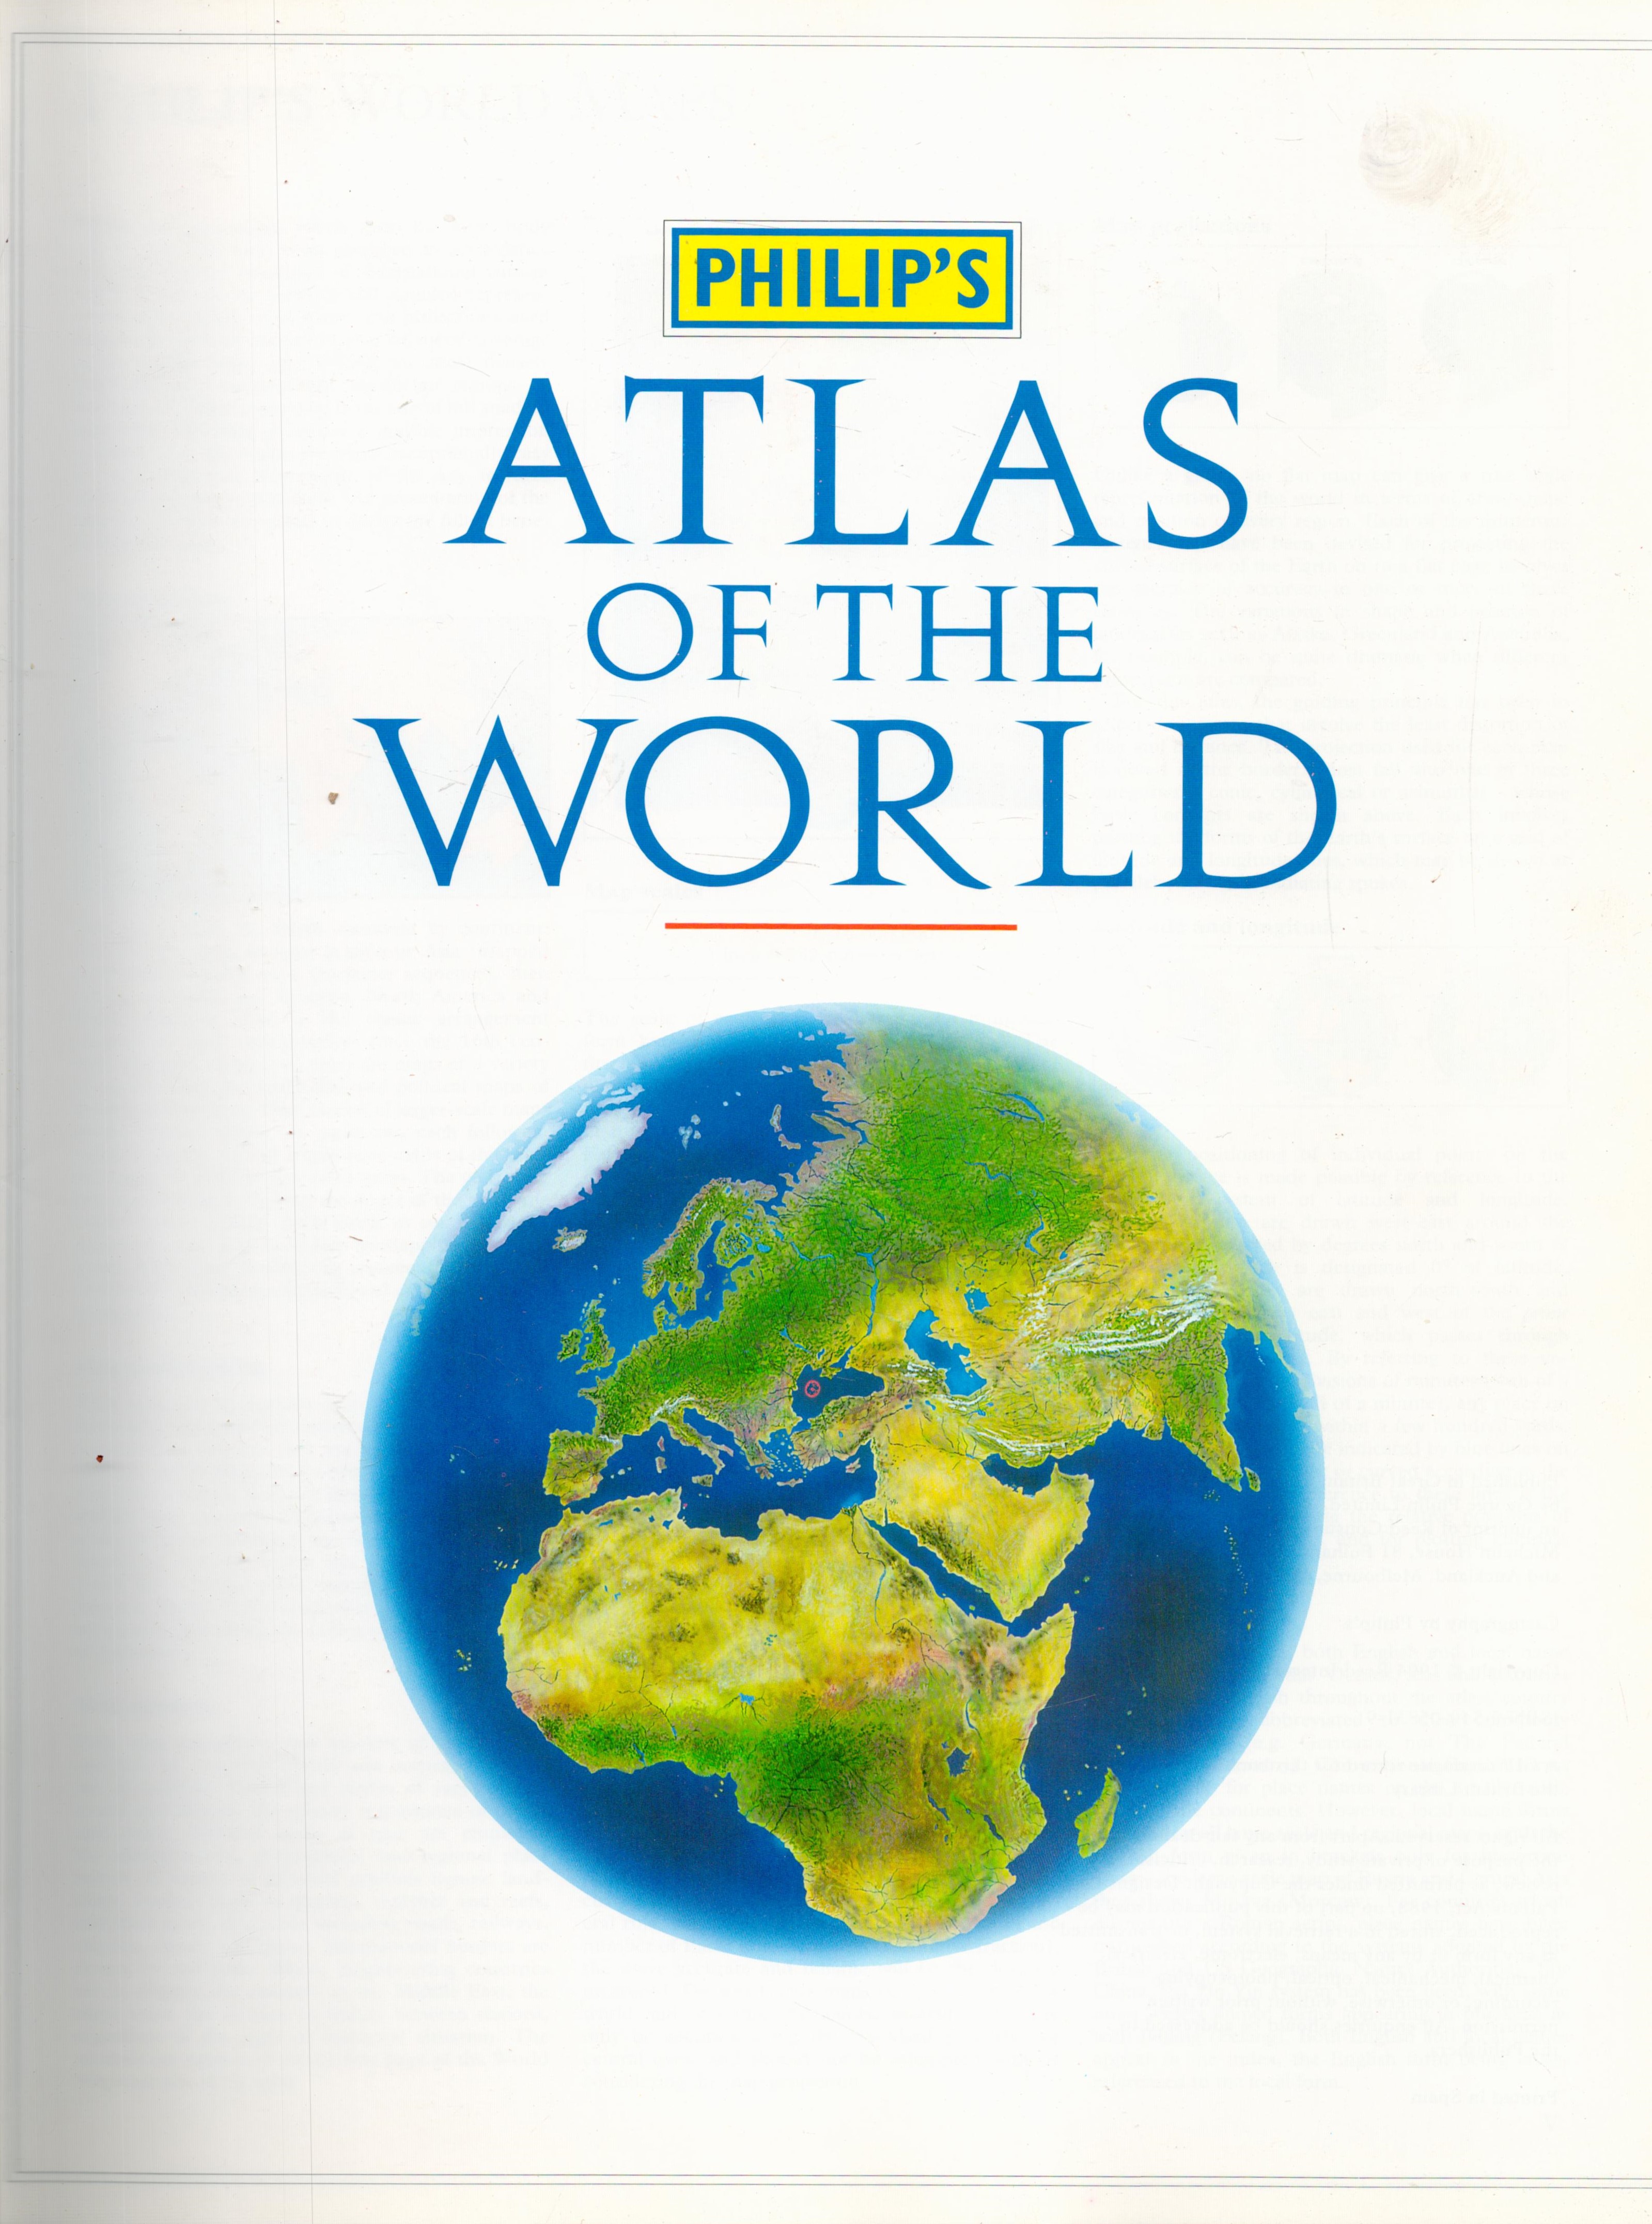 Philips Atlas of the World. 4th edition 1994. This Philips edition contains Philip's finest maps - Image 2 of 3